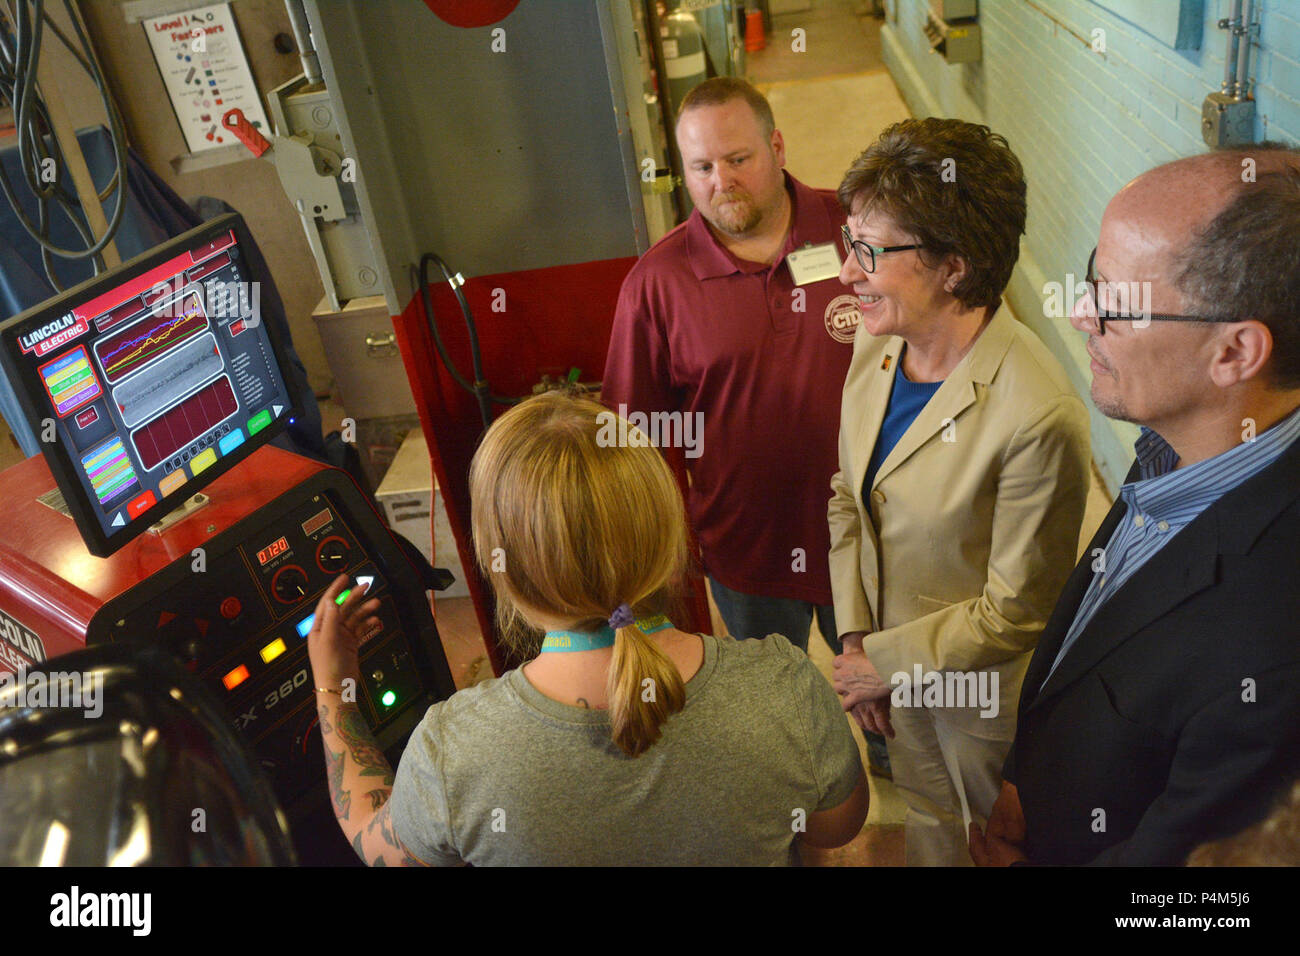 KITTERY, Maine -- 5/27/15 -- Portsmouth Naval Shipyard (PNS) employee Jen Ouellette, left, explains the operation of a virtual welding trainer system to U.S. Senator Susan Collins (R-Maine) and U.S. Secretary of Labor Thomas Perez at PNS in Kittery on Wednesday.  The delegation visited Bath Iron Works in Bath and Portsmouth Naval Shipyard in Kittery to promote private and public partnerships supporting apprenticeships in the maritime industry. Stock Photo